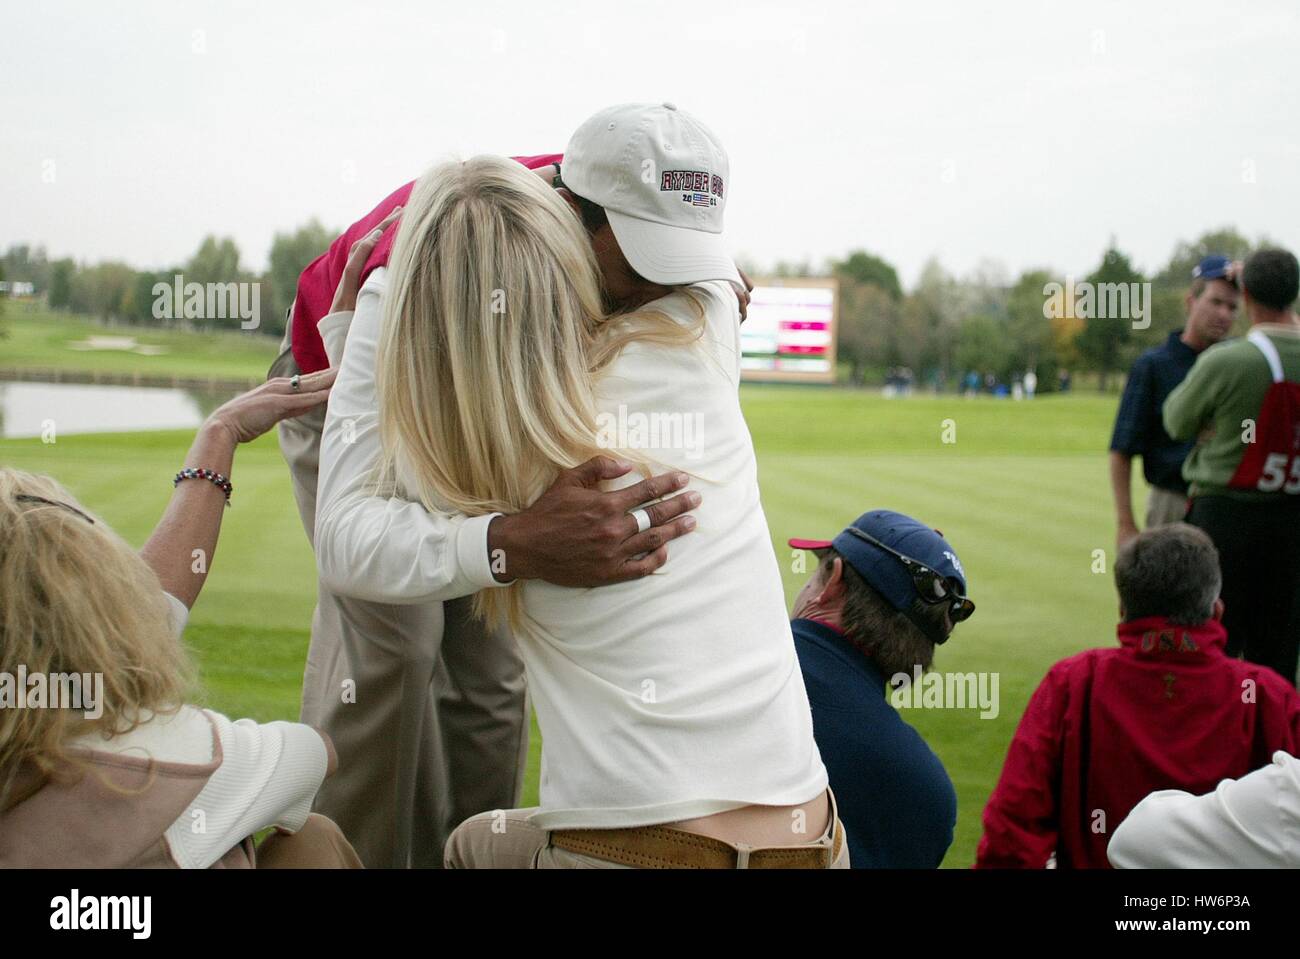 TIGER WOODS AND ELIN NORDEGREN USA RYDER CUP 02 28 September 2002 Stock Photo